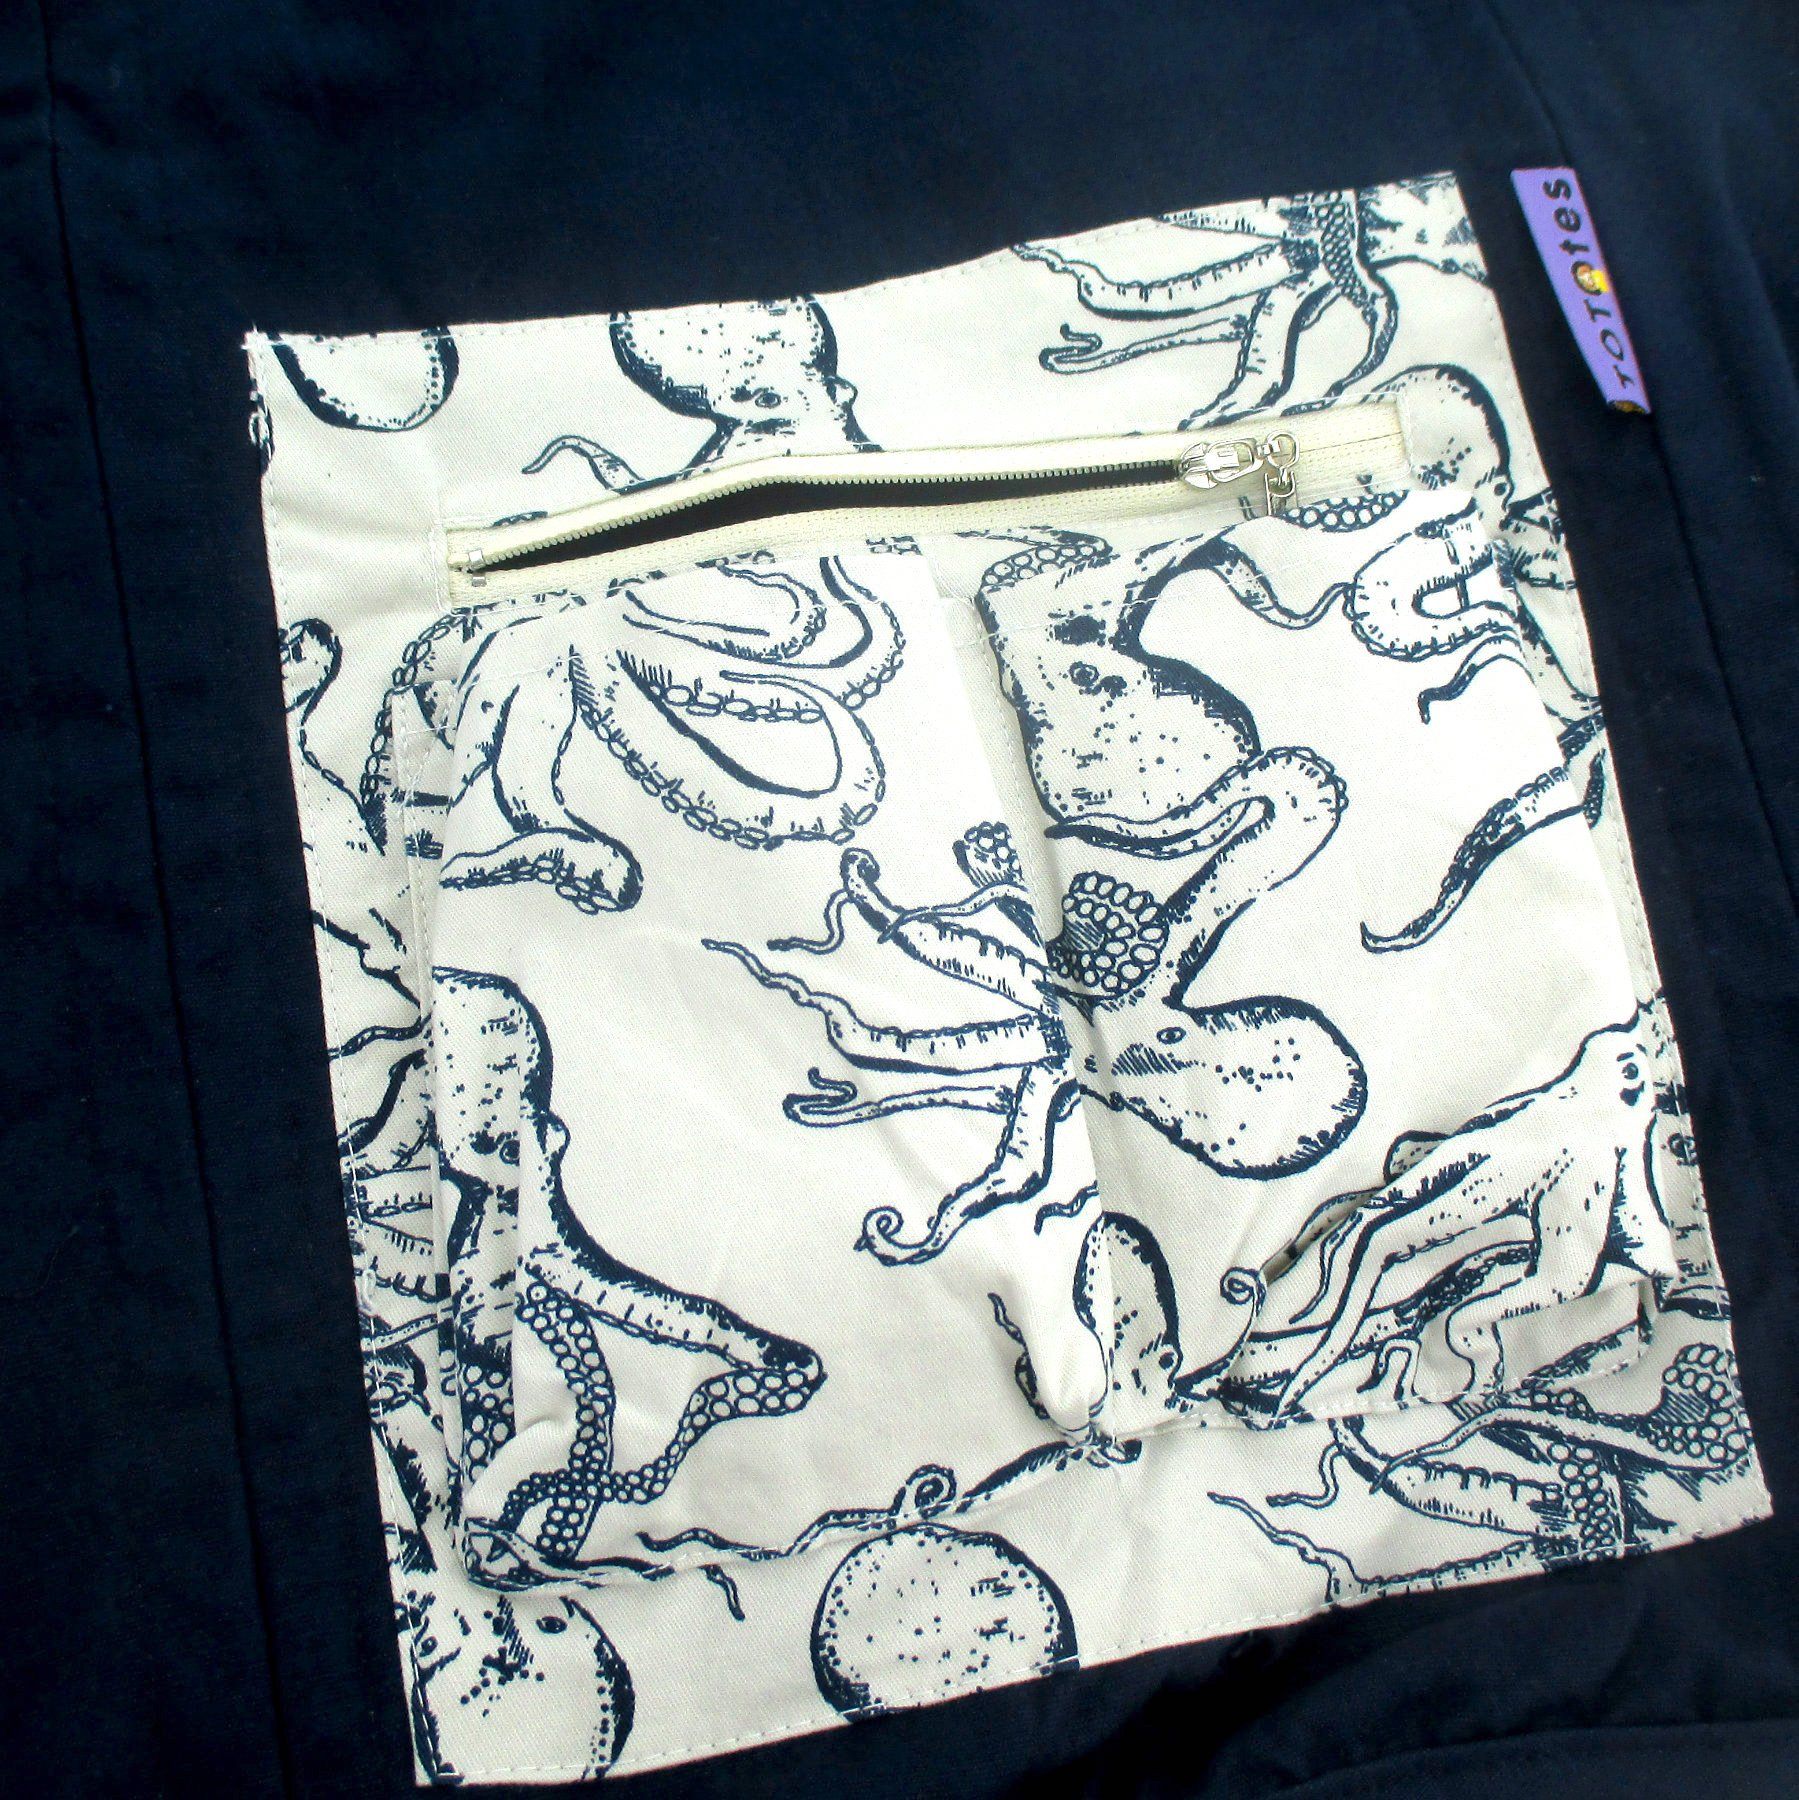 Octopus All Over Print Cotton Large Market Weekend Tote Bag in Blue or Purple